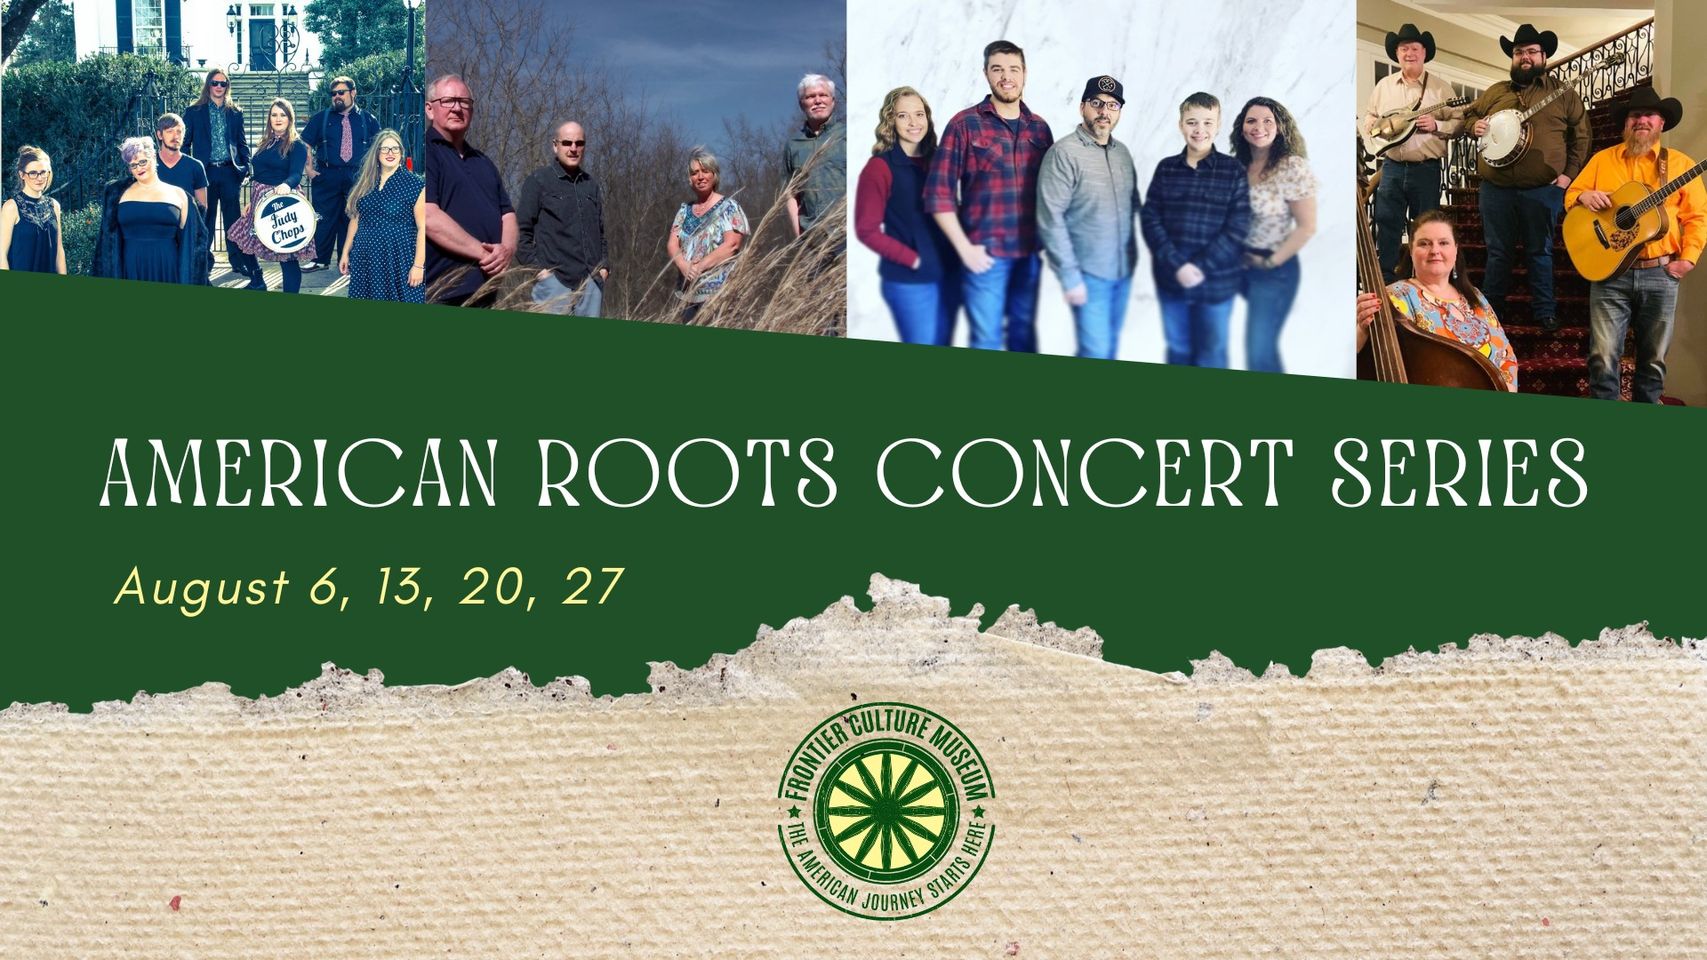 American Roots Concert Series